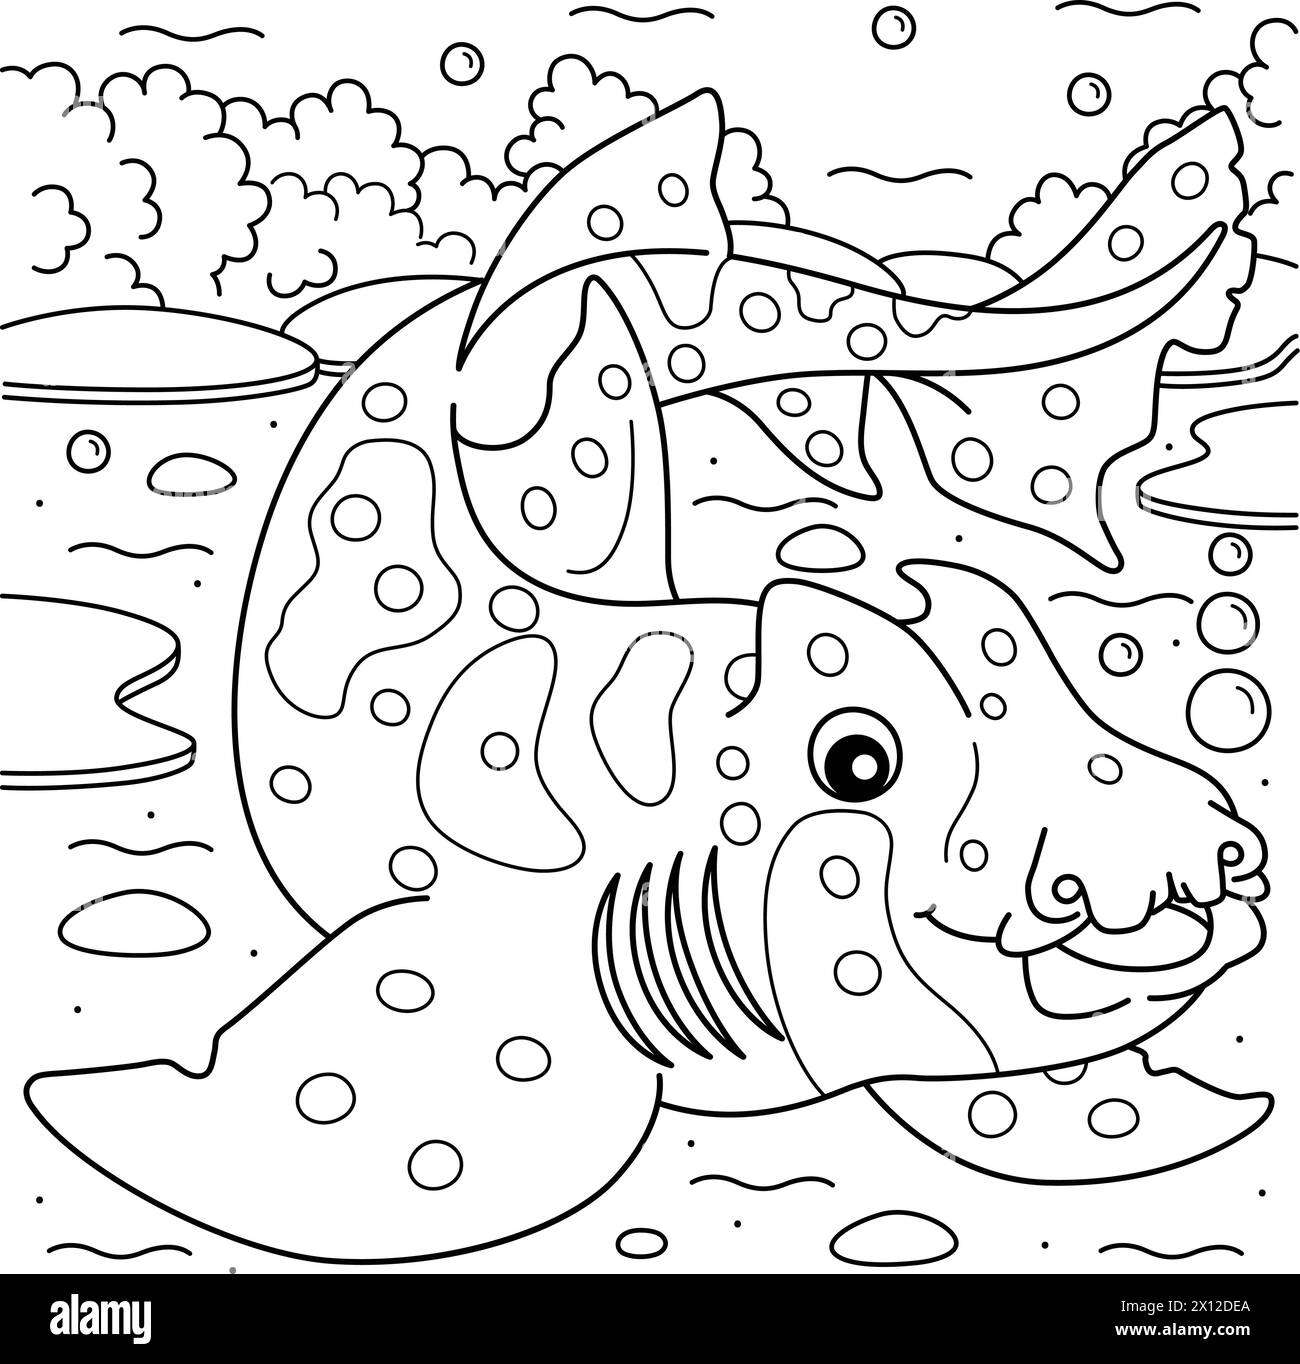 Horn Shark Coloring Page for Kids Stock Vector